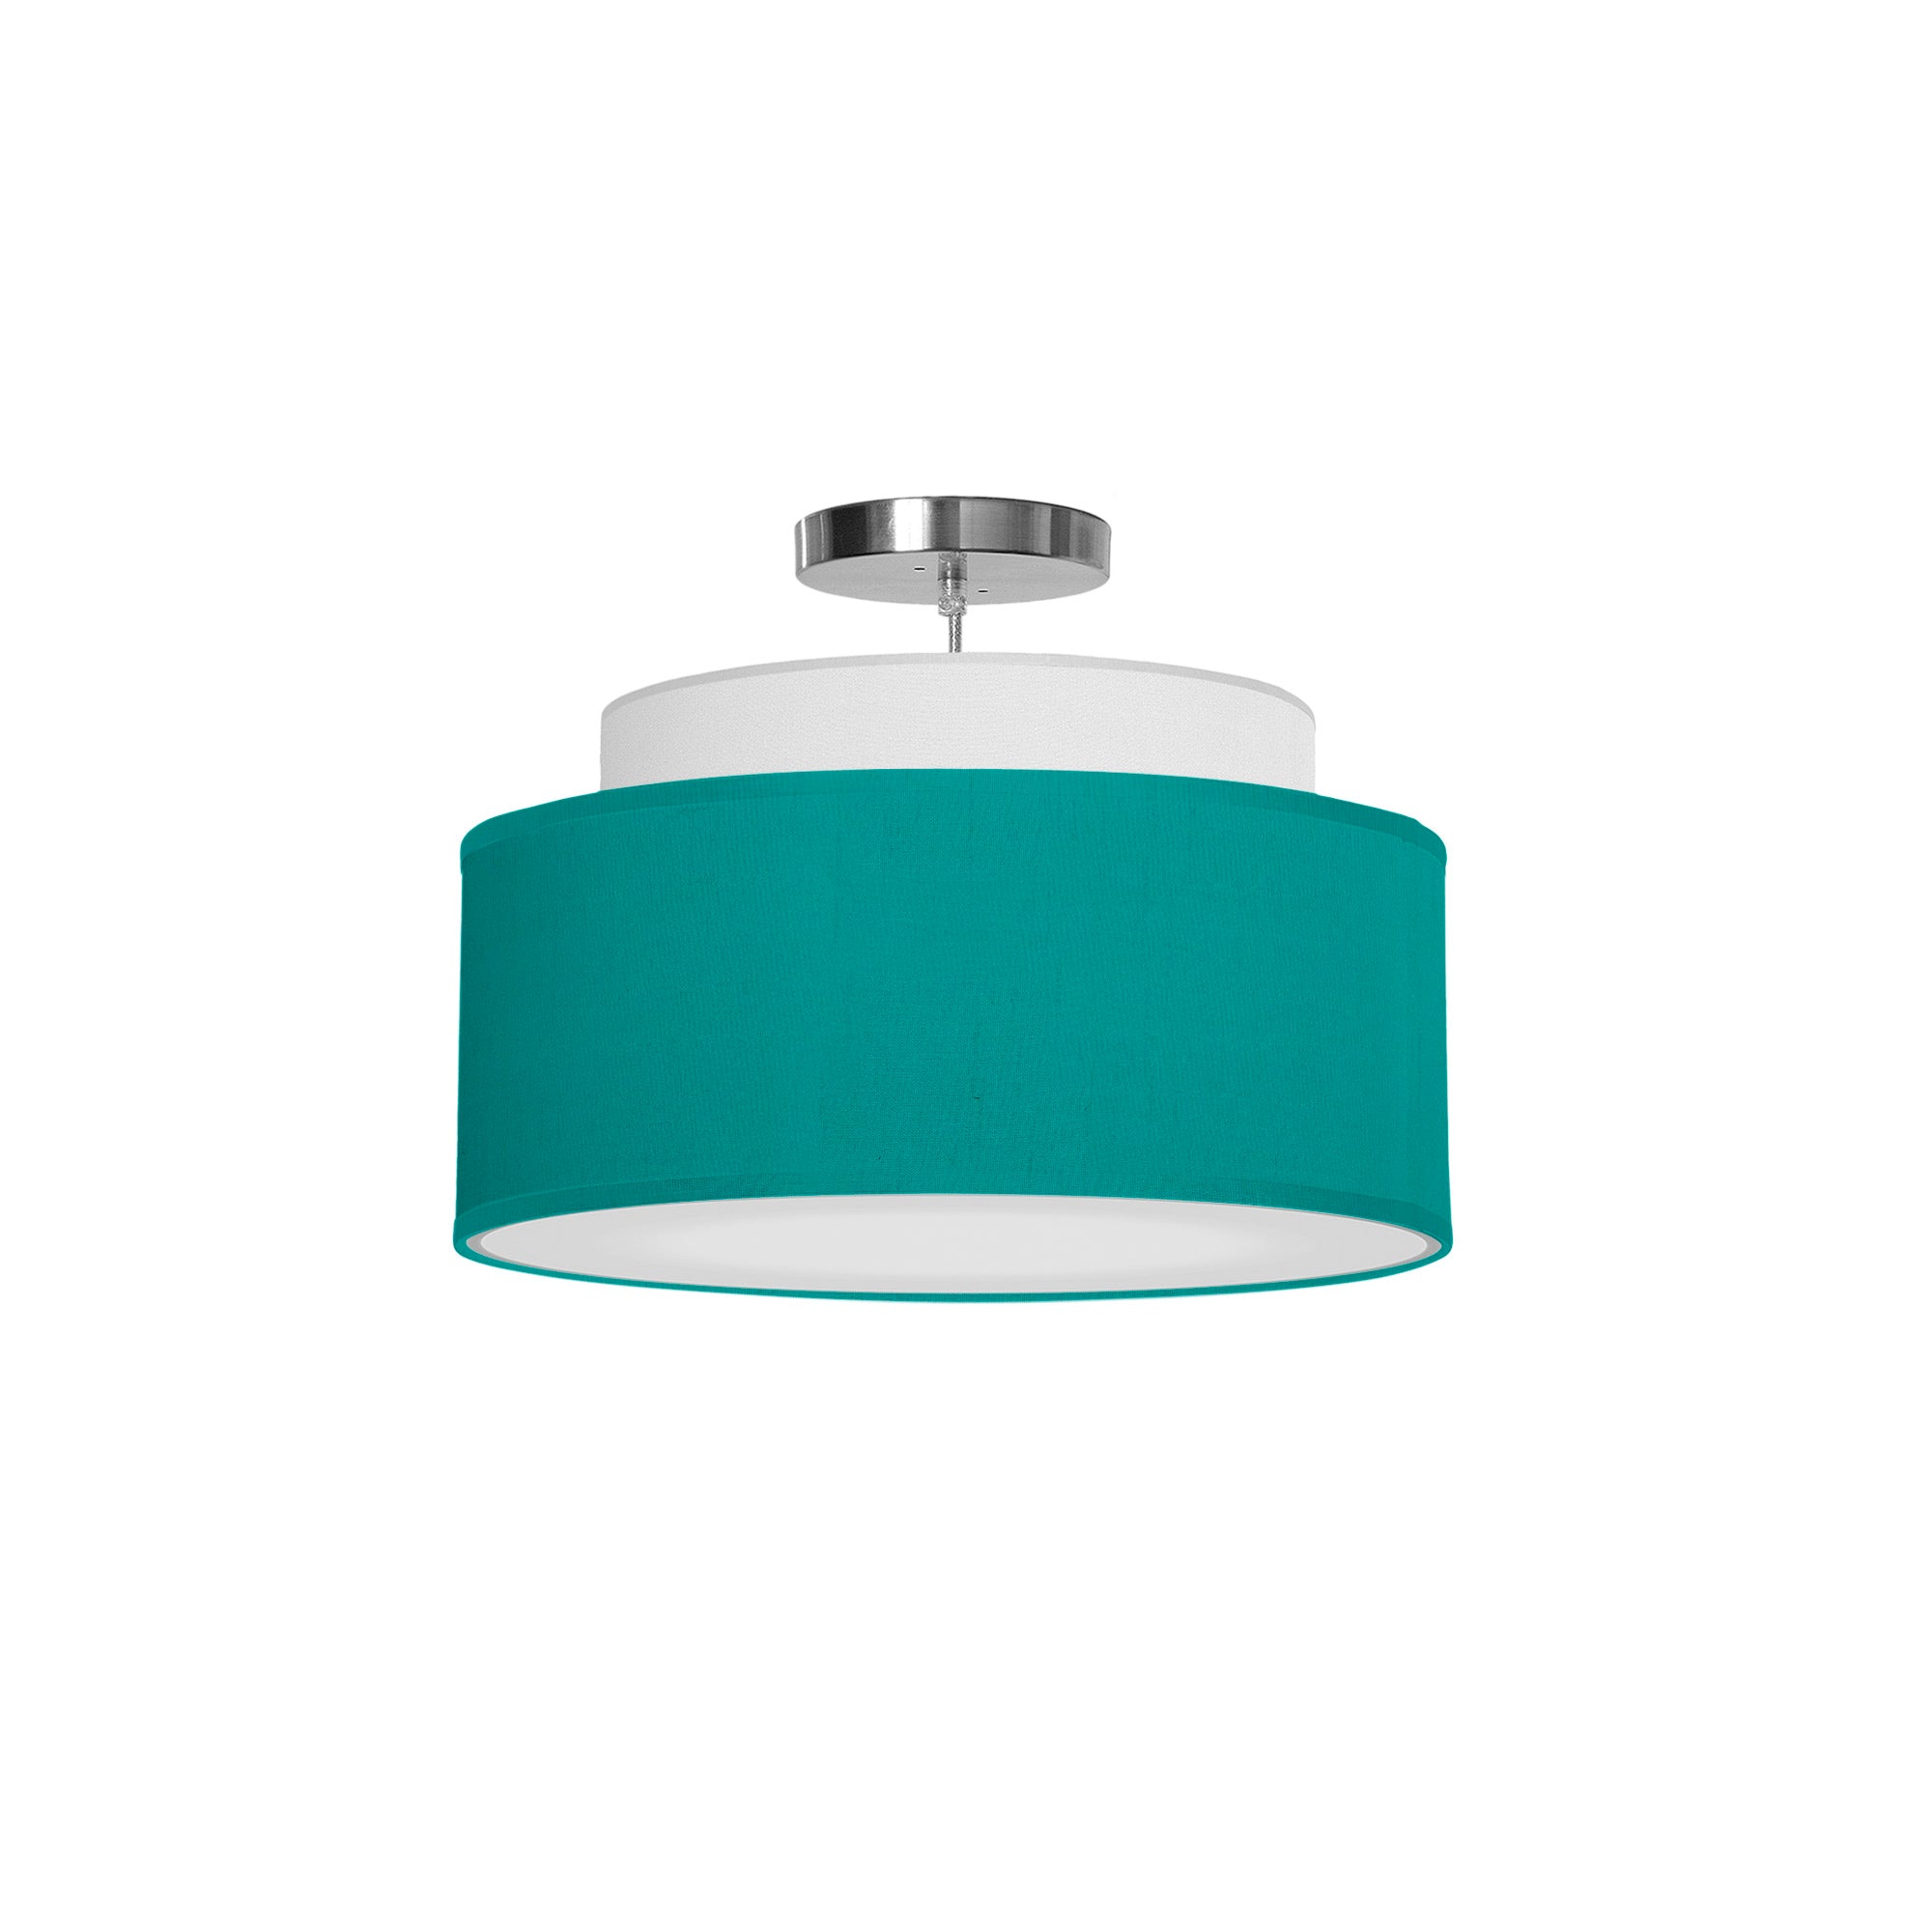 The Elsa Hanging Lamp from Seascape Fixtures with a silk shade in turquoise color.